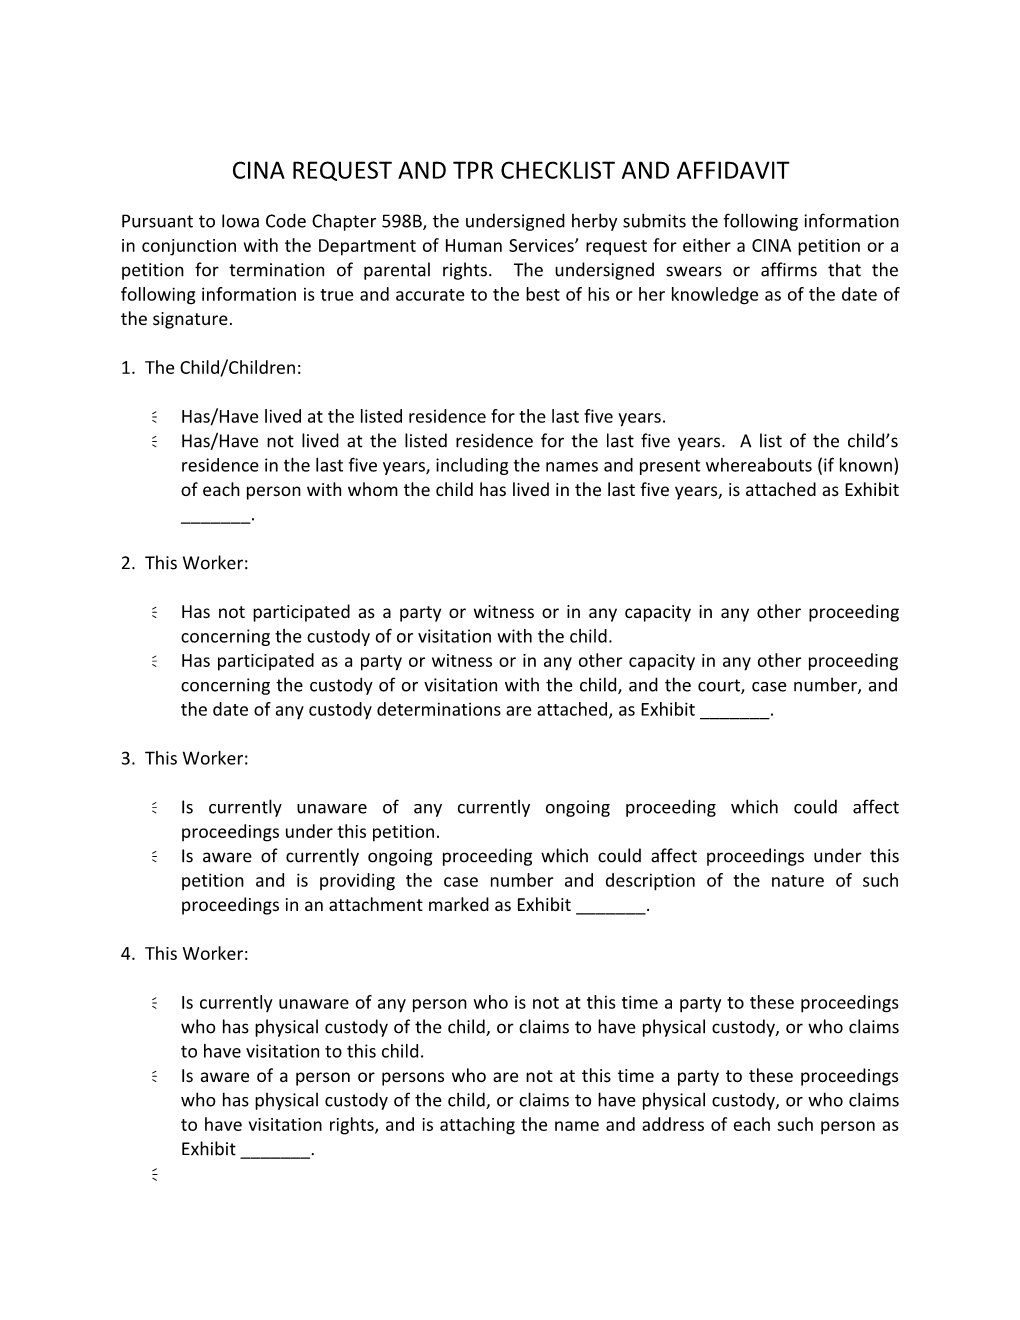 Cina Request and Tpr Checklist and Affidavit